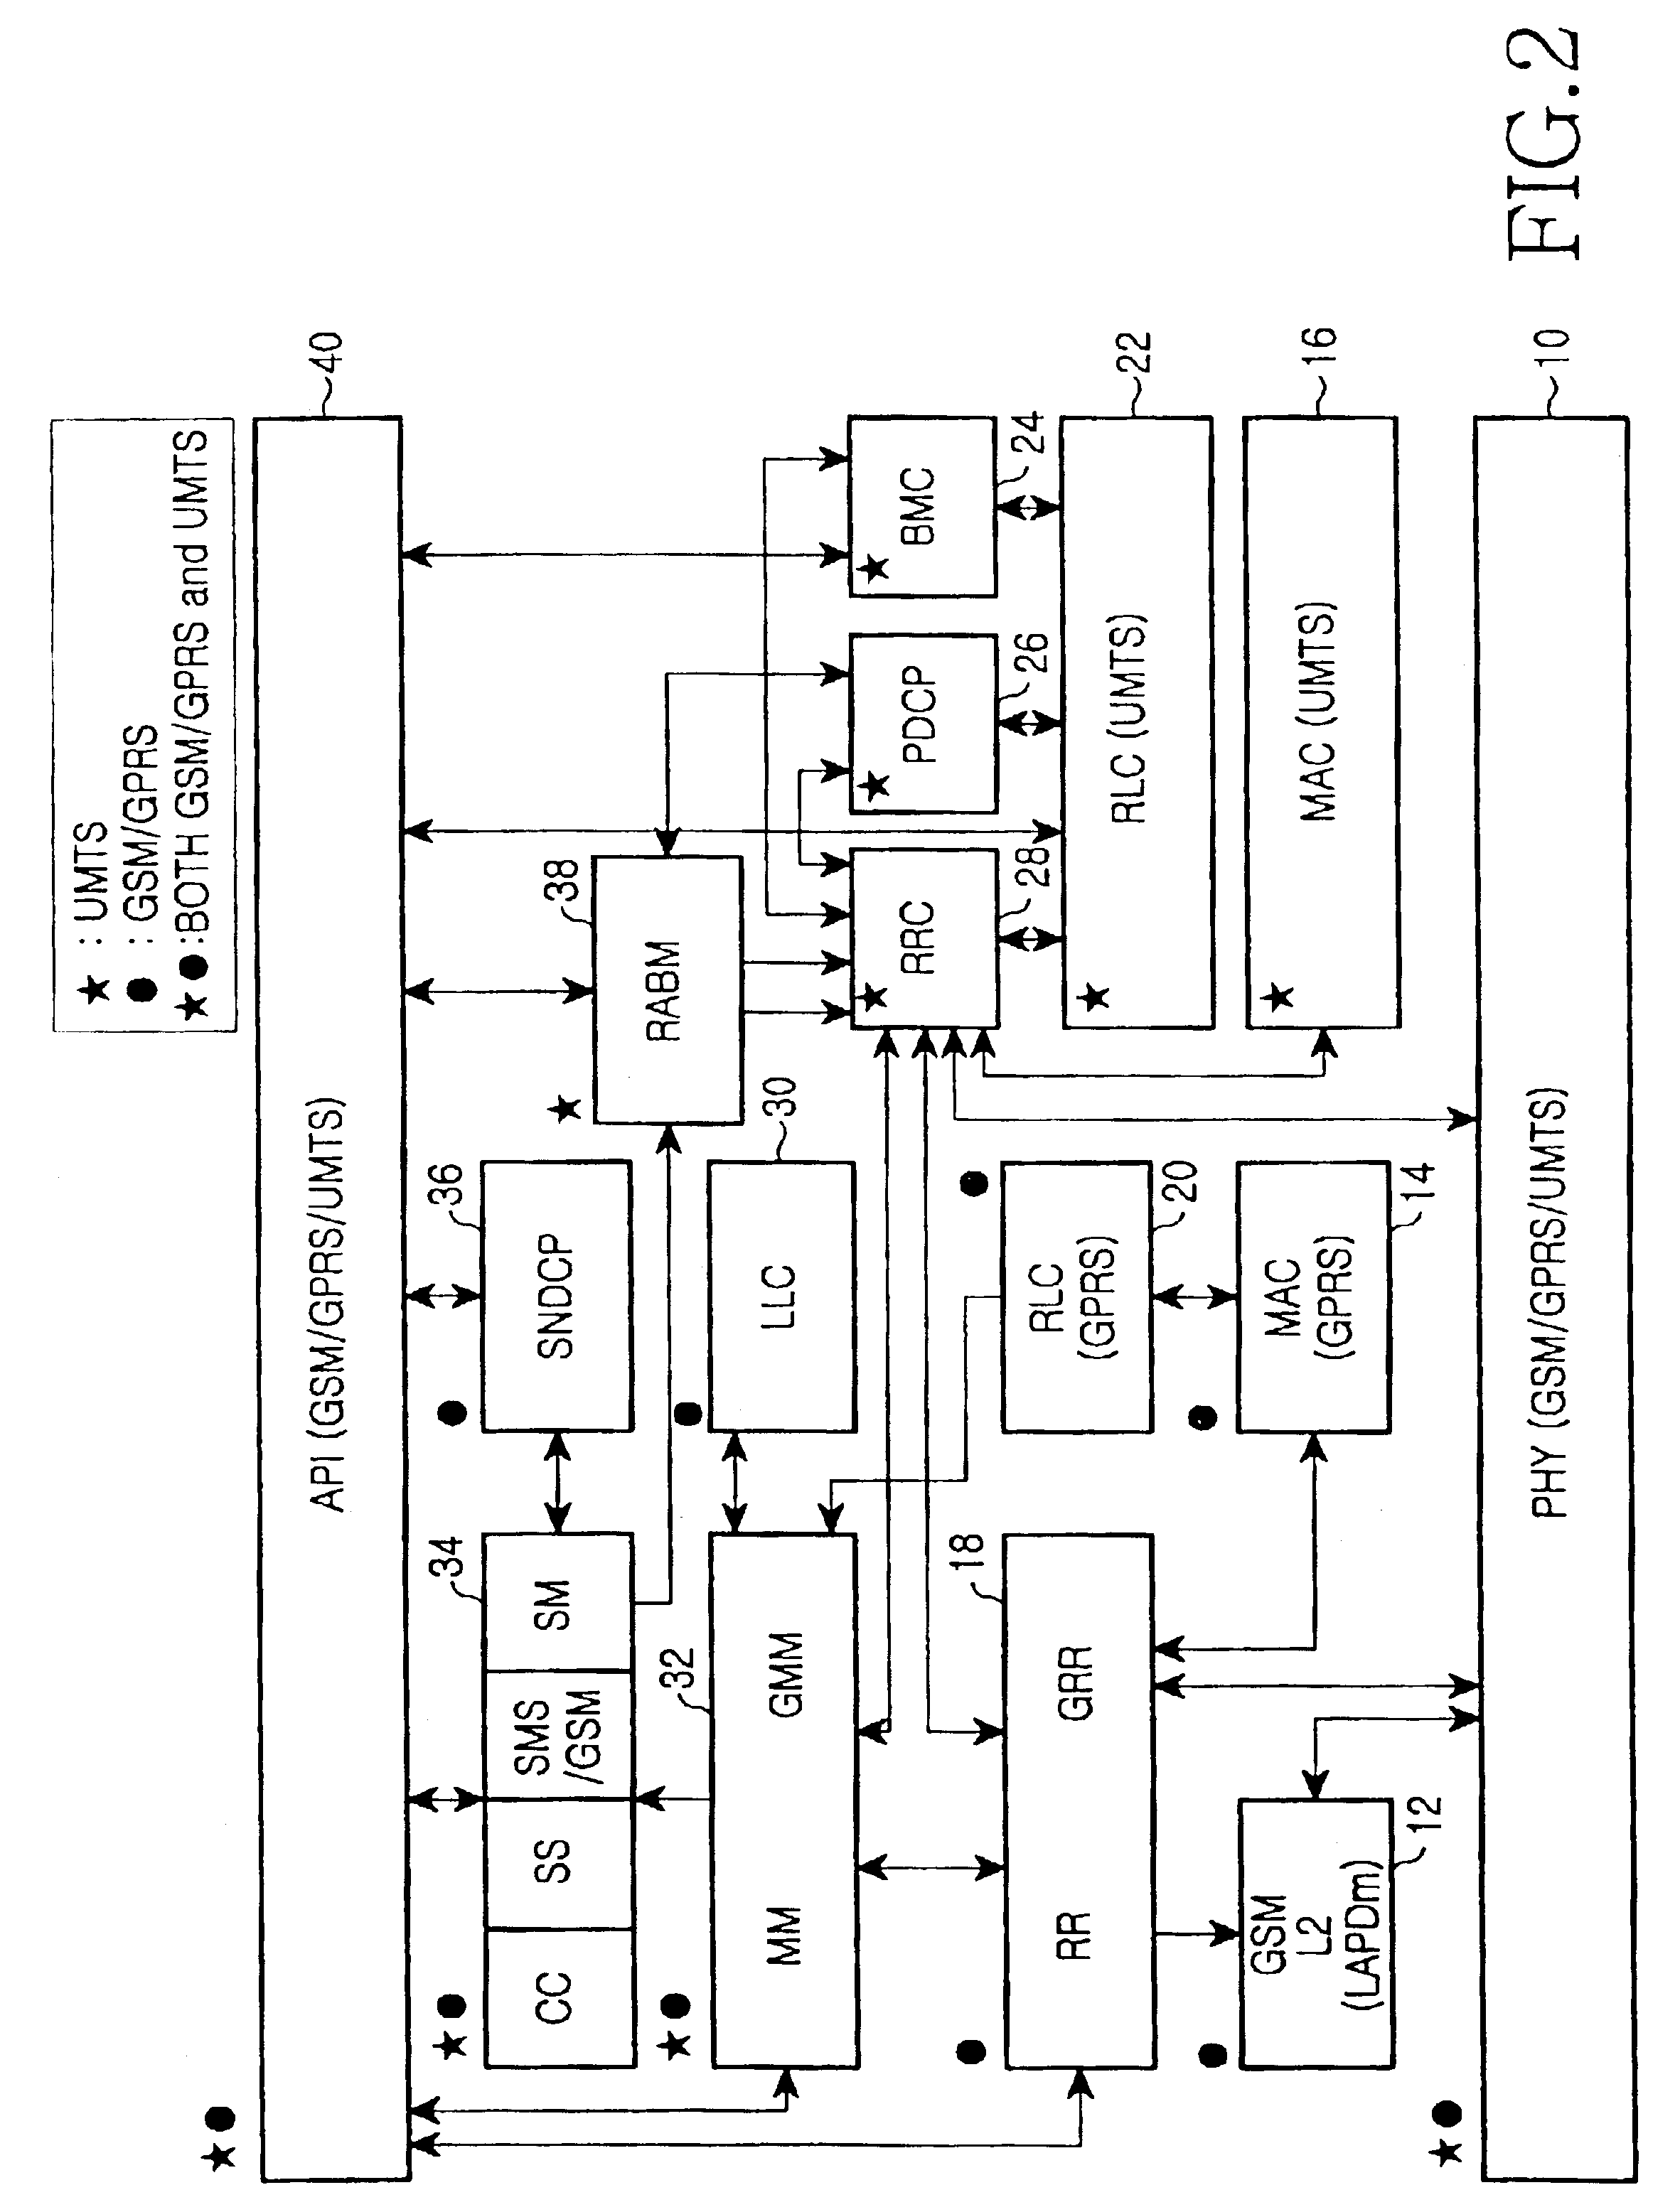 Method for performing inter system handovers in mobile telecommunication system